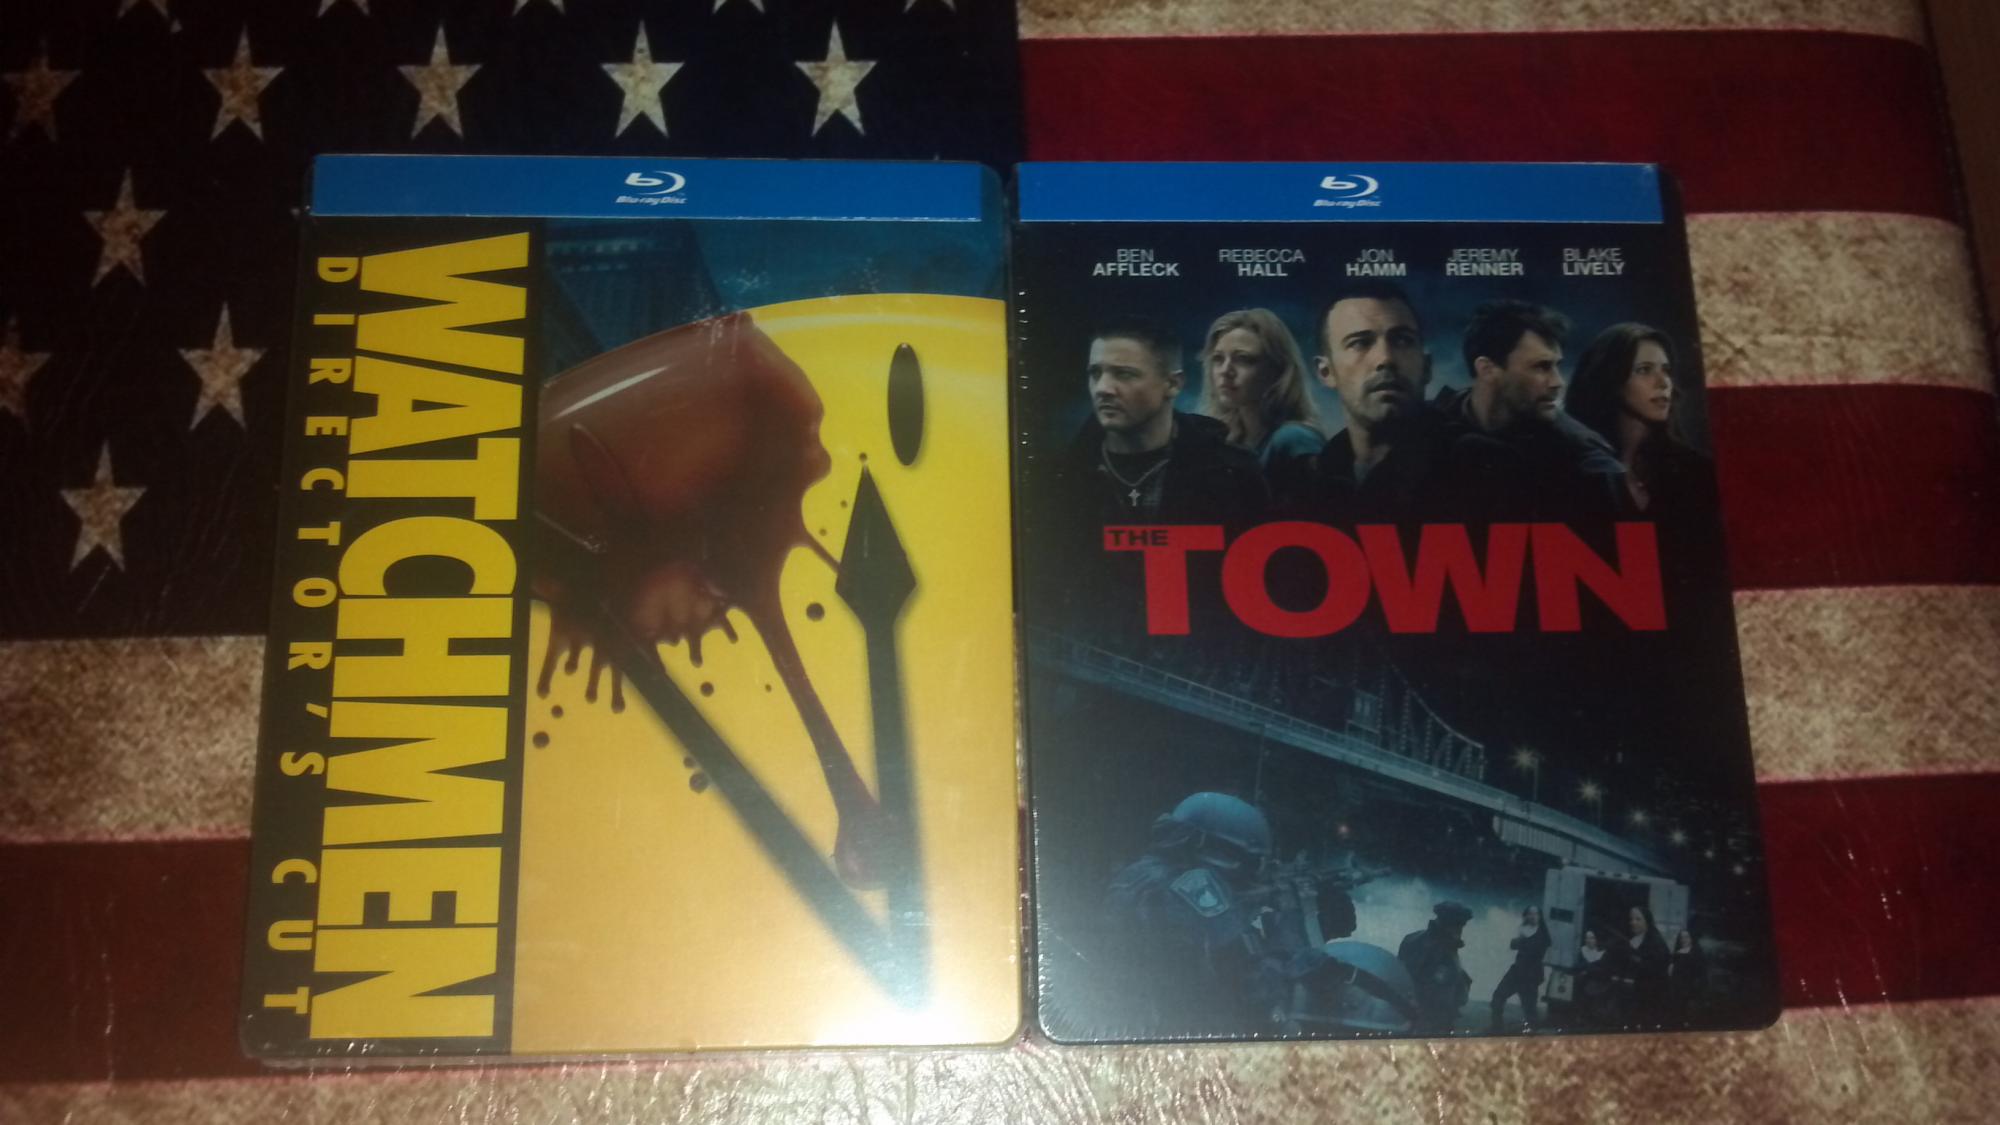 Watchmen & The Town